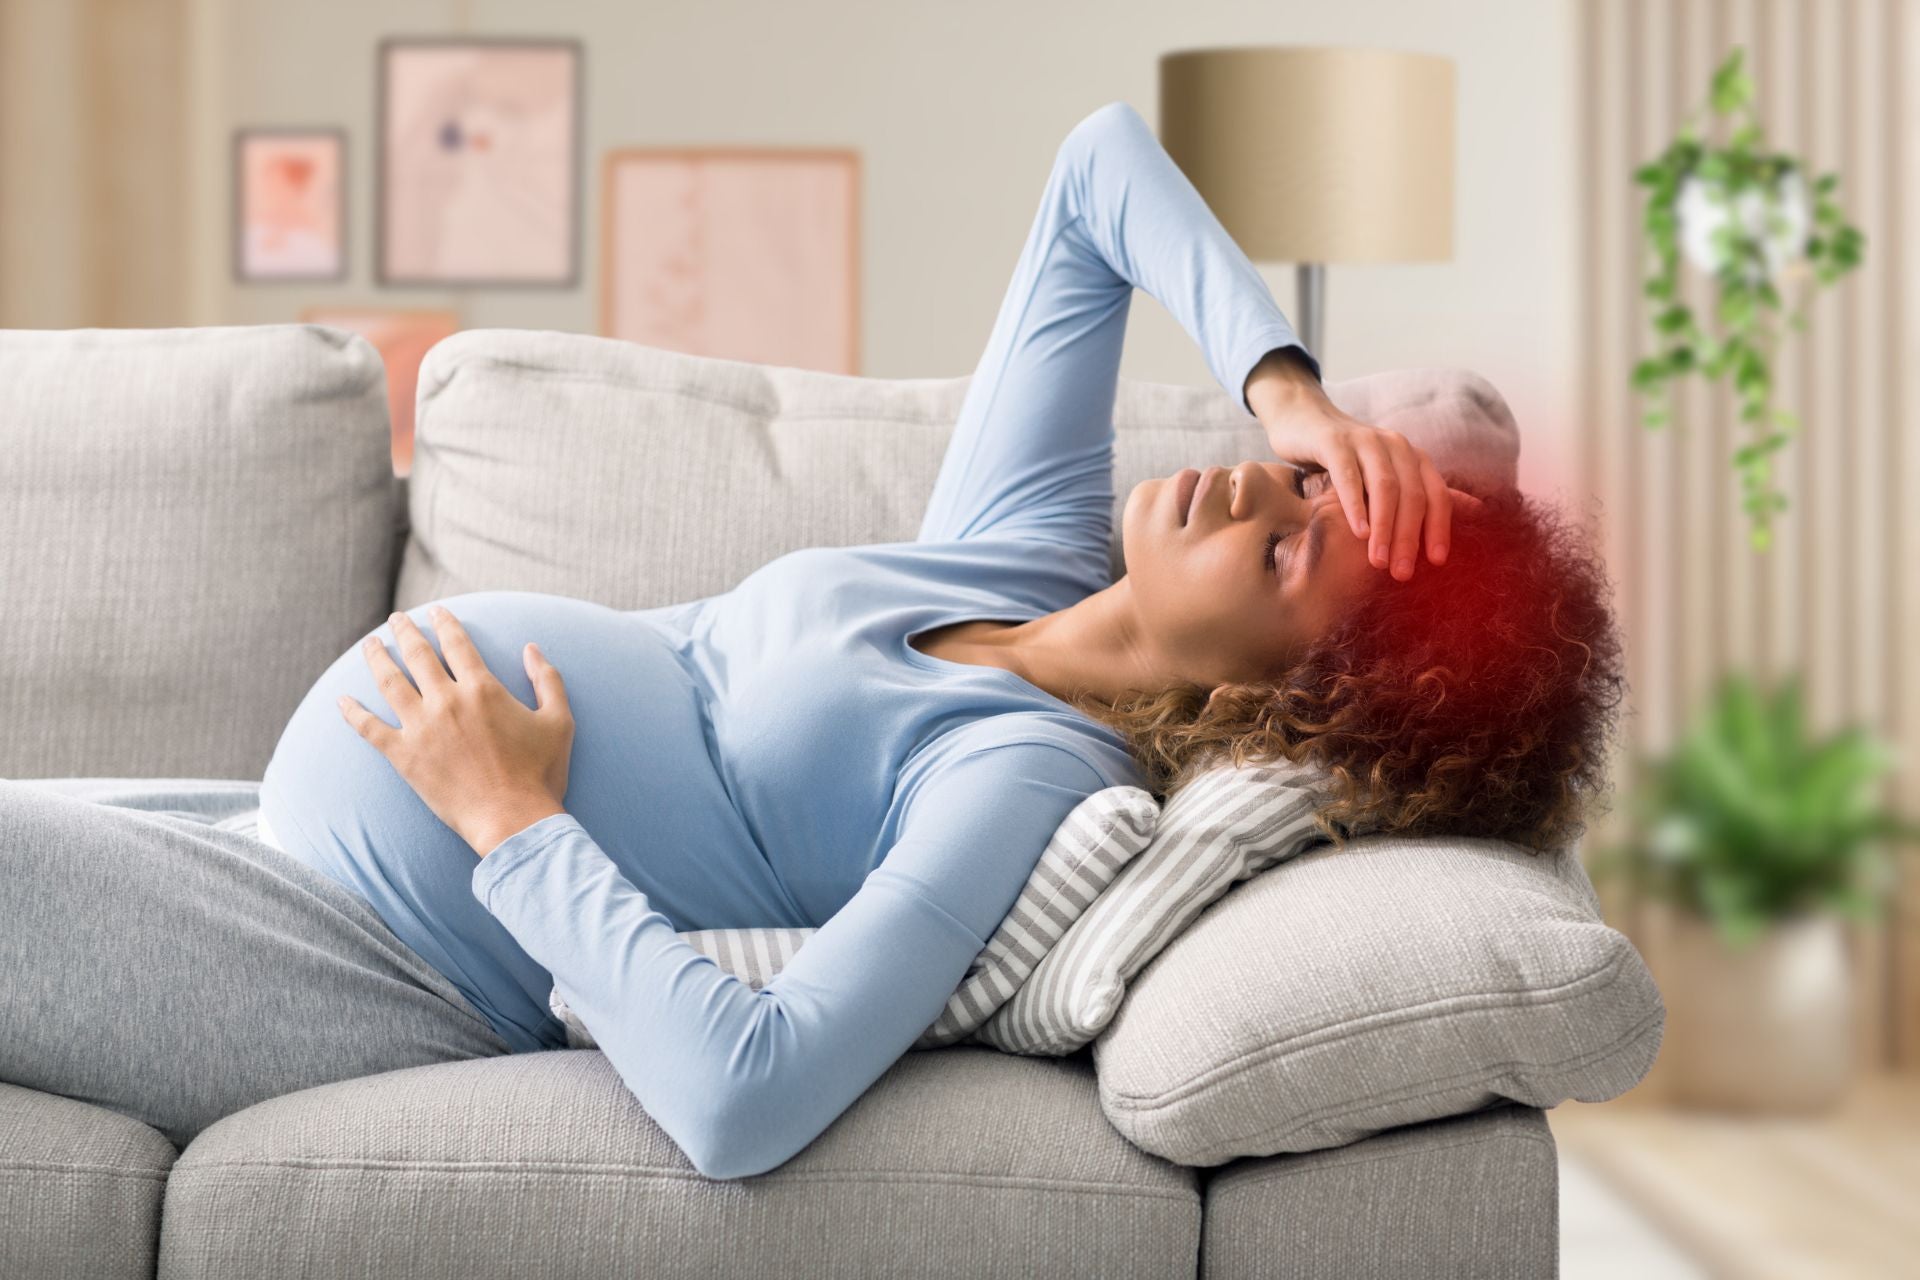 A pregnant woman experiencing Common Triggers for Migraine.